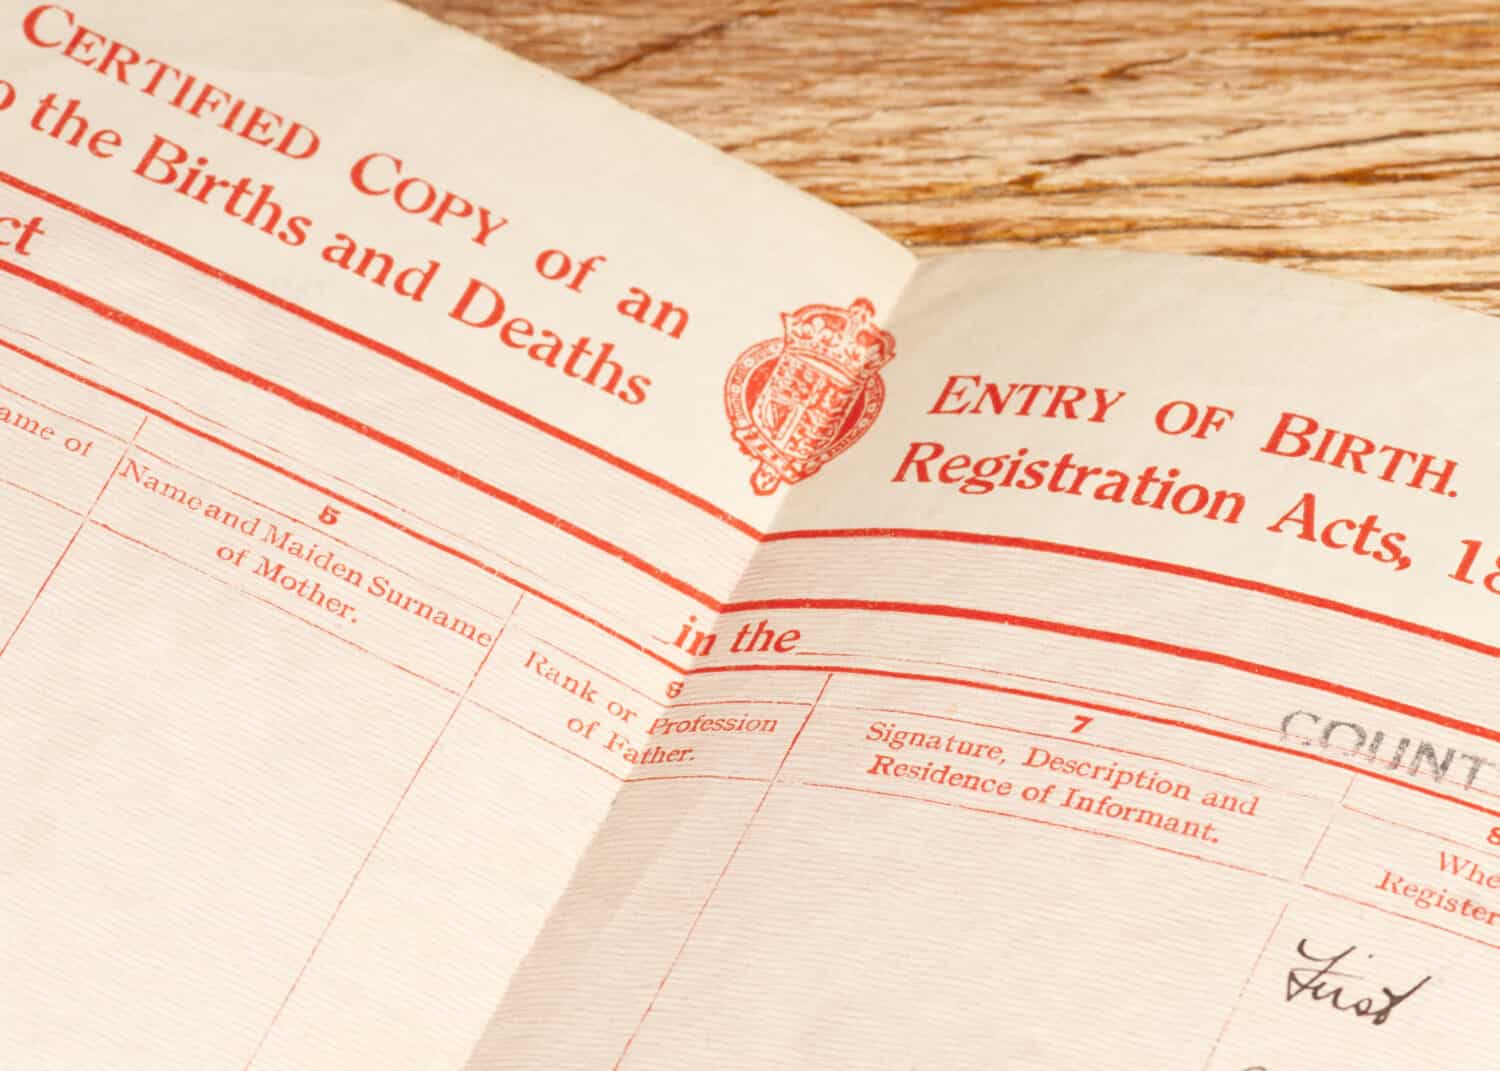 Old, circa 1948, blank British Birth Certificate showing the main headings.